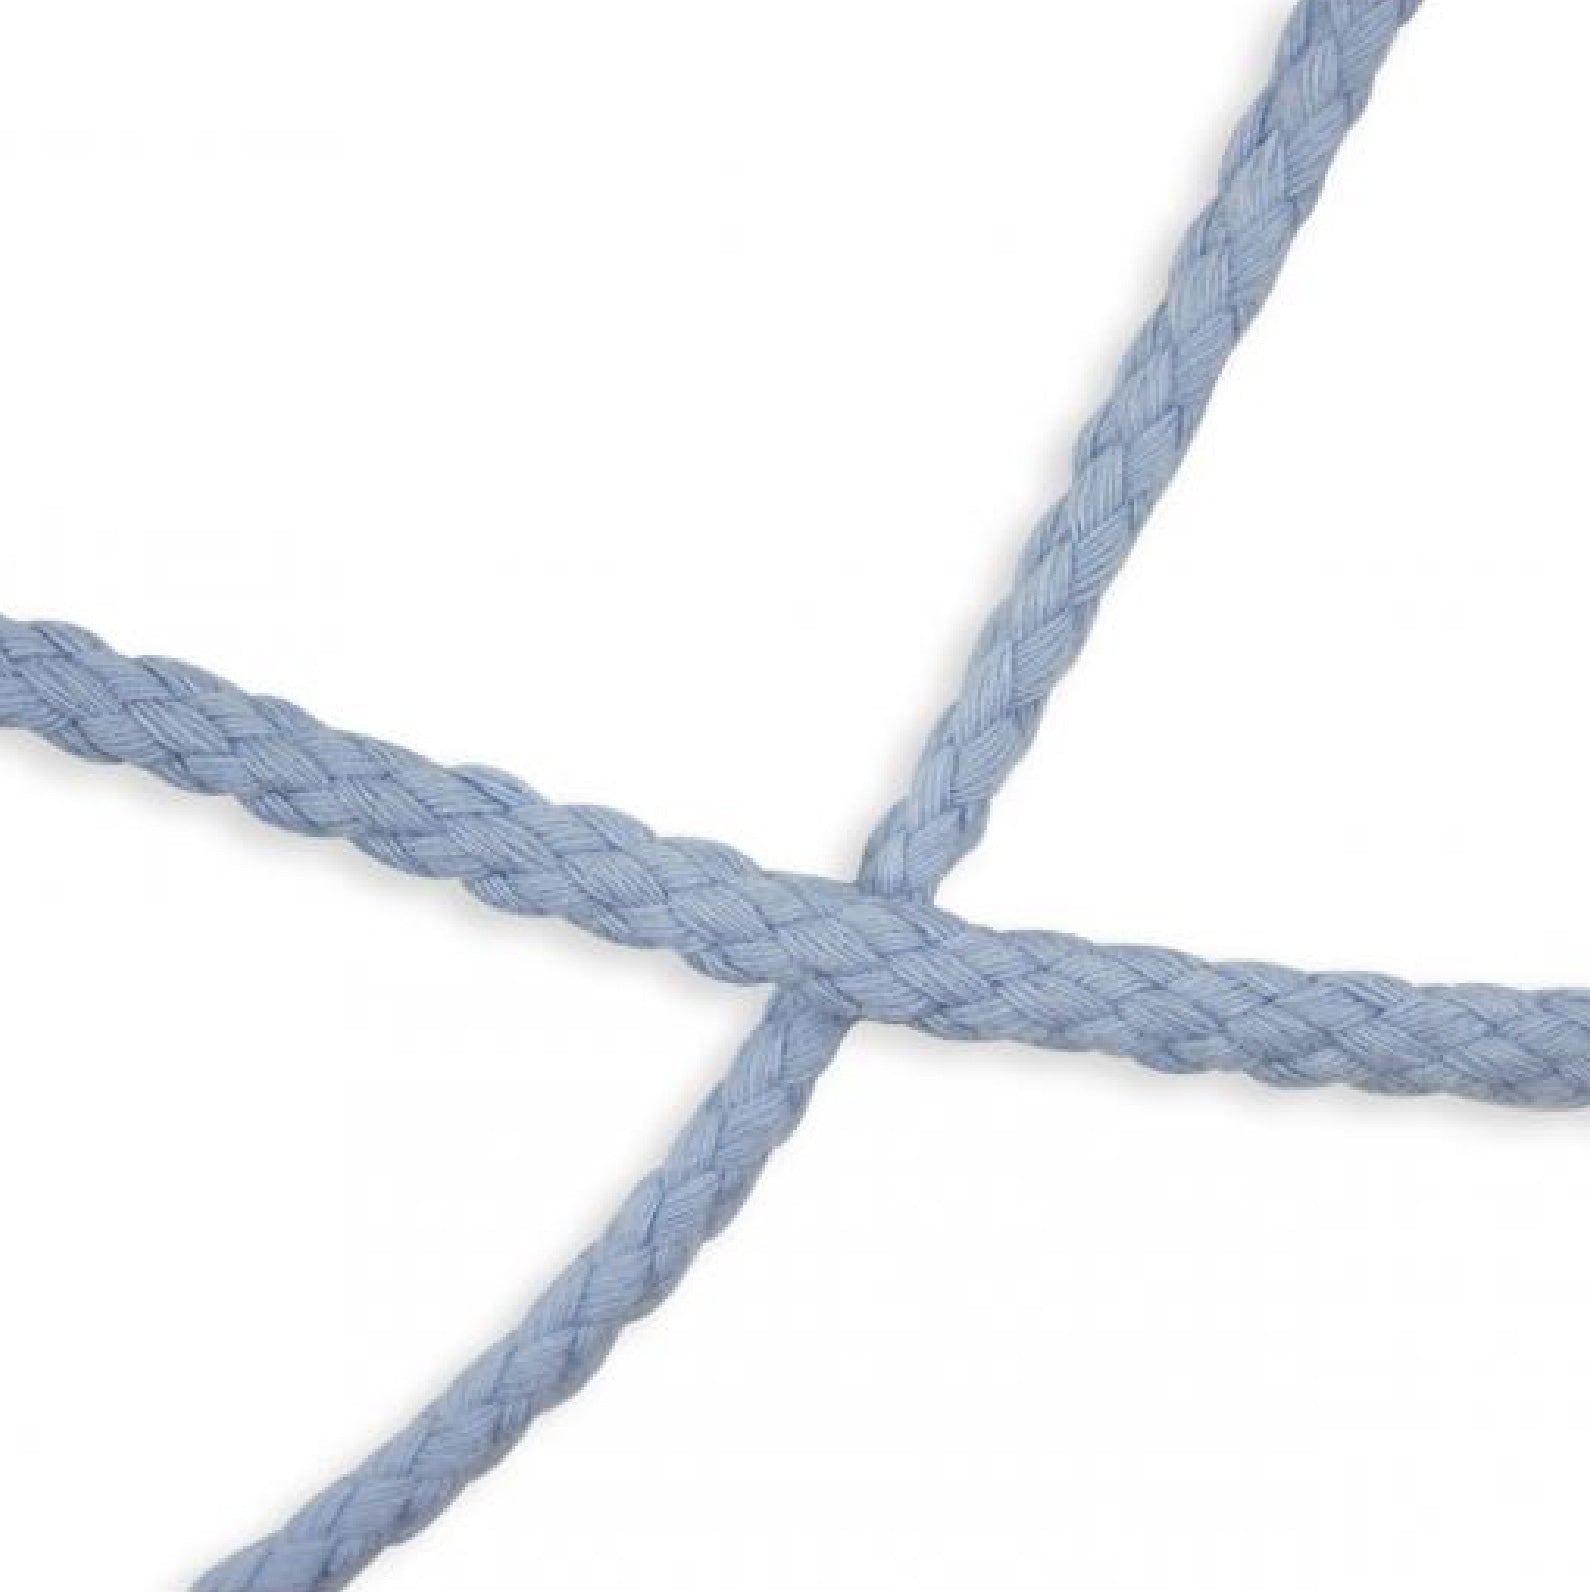 Pale blue - Rope 6mm